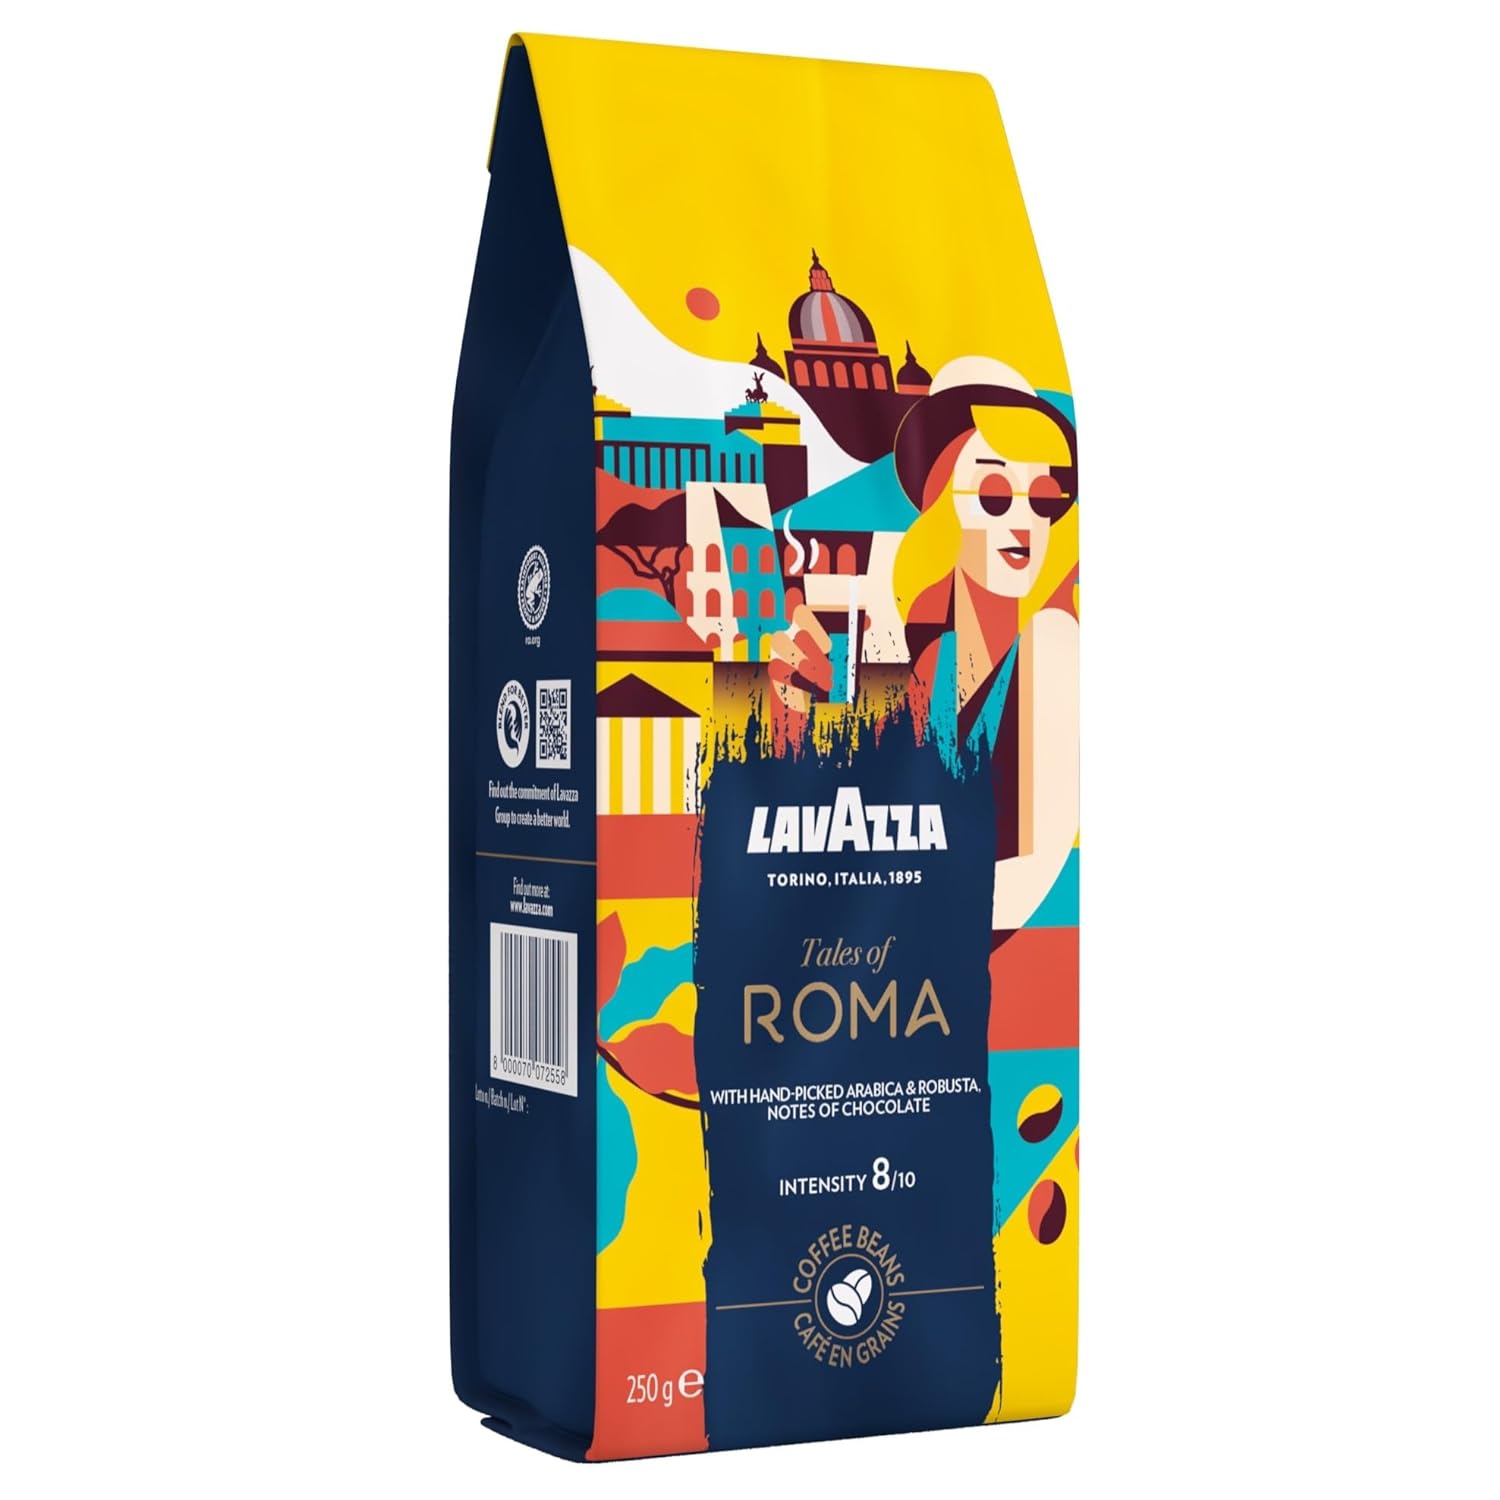 Lavazza, Tales of Italy Roma, Dark Roasting, Full-bodied Enjoyment with an Intensity of 8/10, Strong Notes of Hazelnut and Dark Chocolate, 250 g Soft Pack